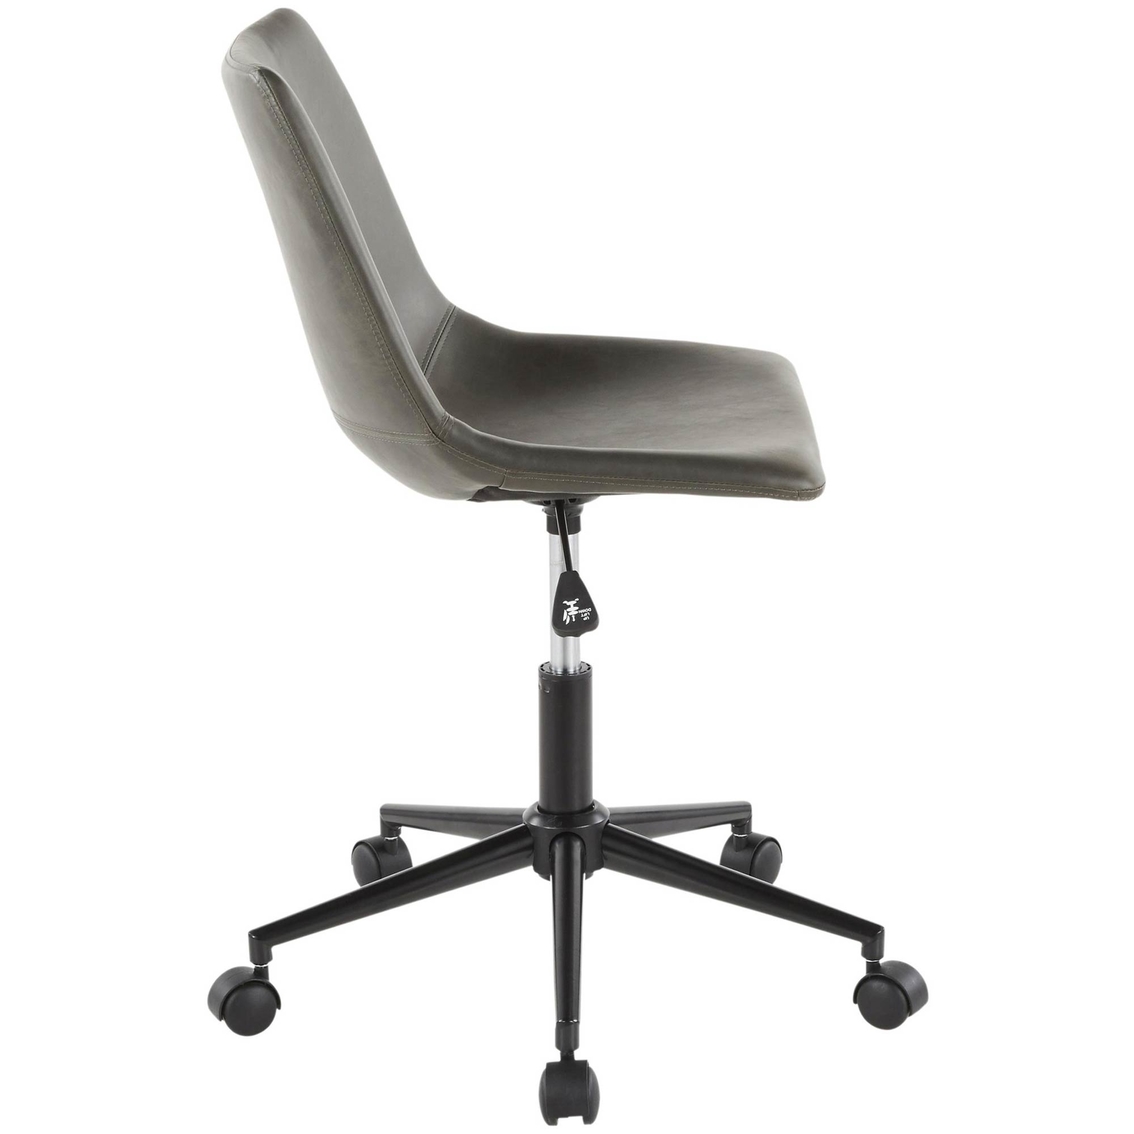 LumiSource Duke Task Industrial Chair - Image 5 of 6